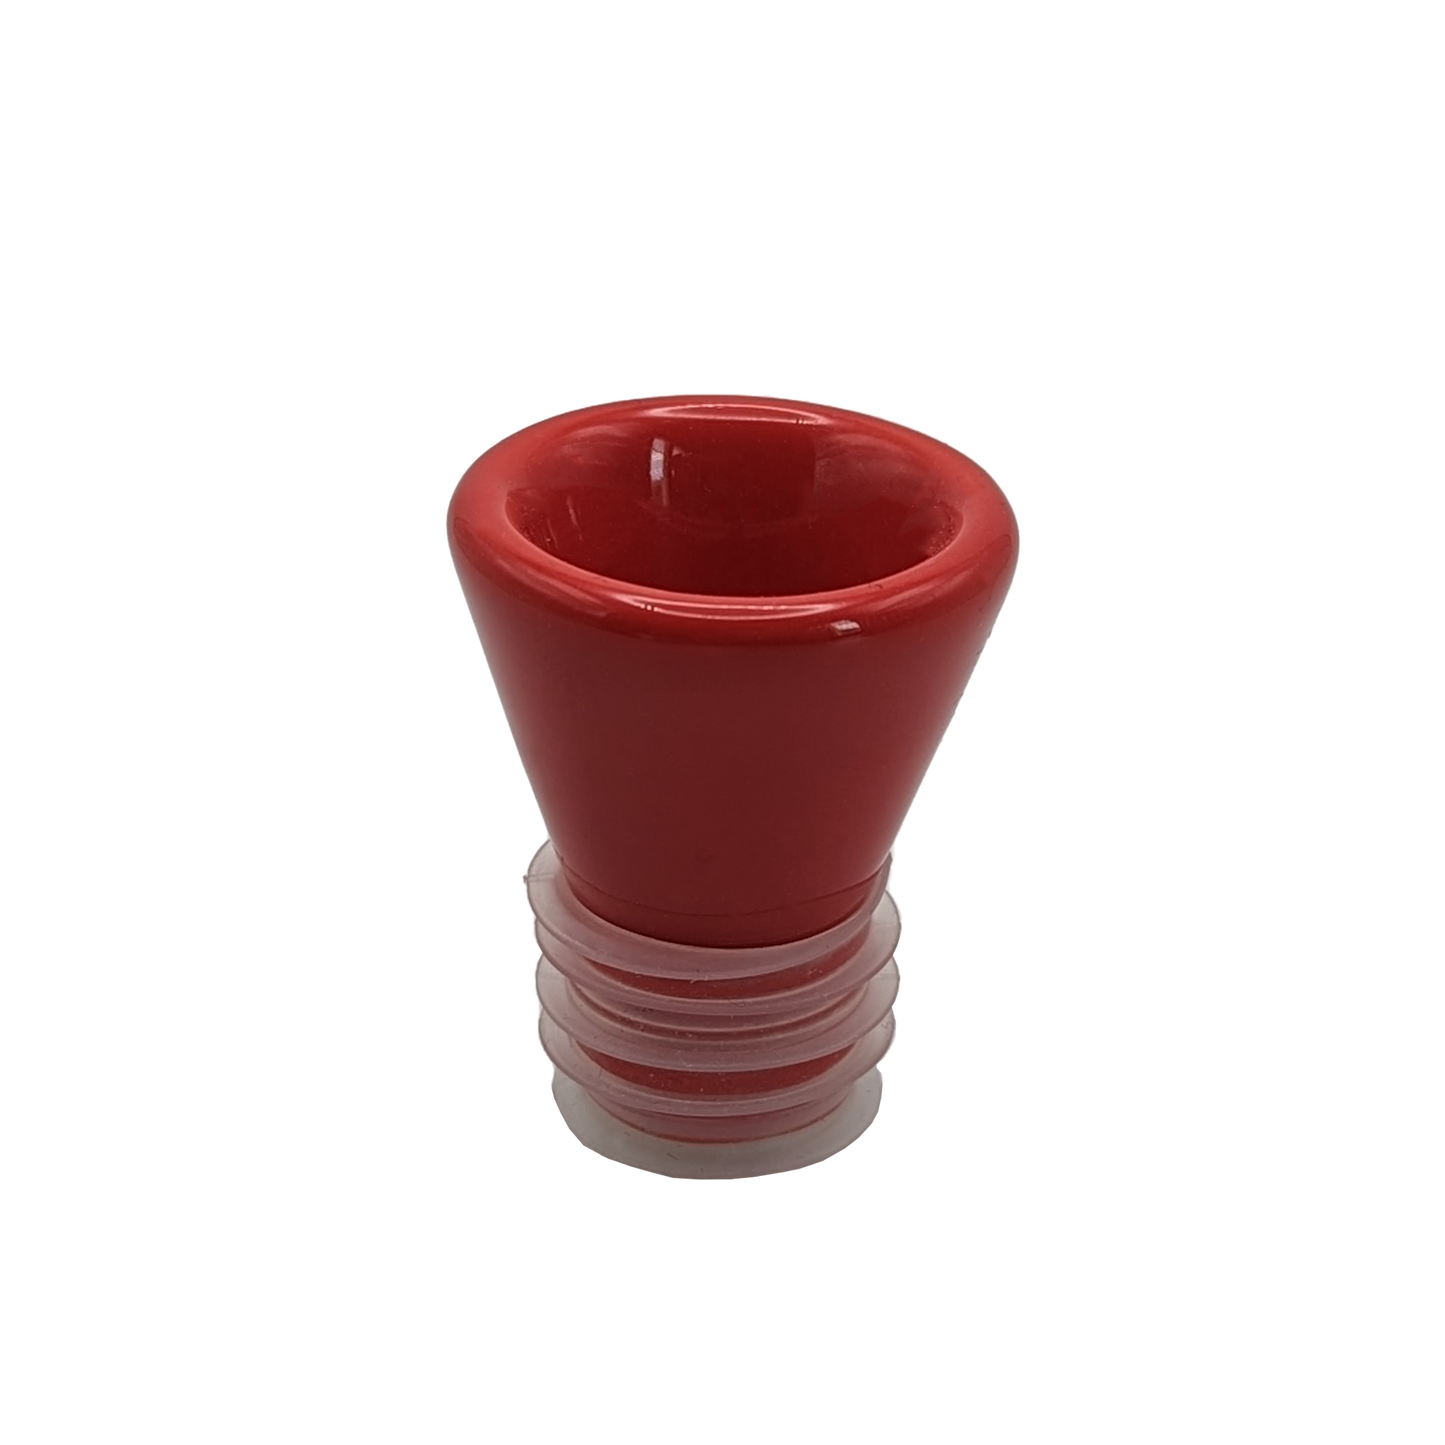 BRNT POLYGON BOWL - CERAMIC BOWL FOR WATER PIPES